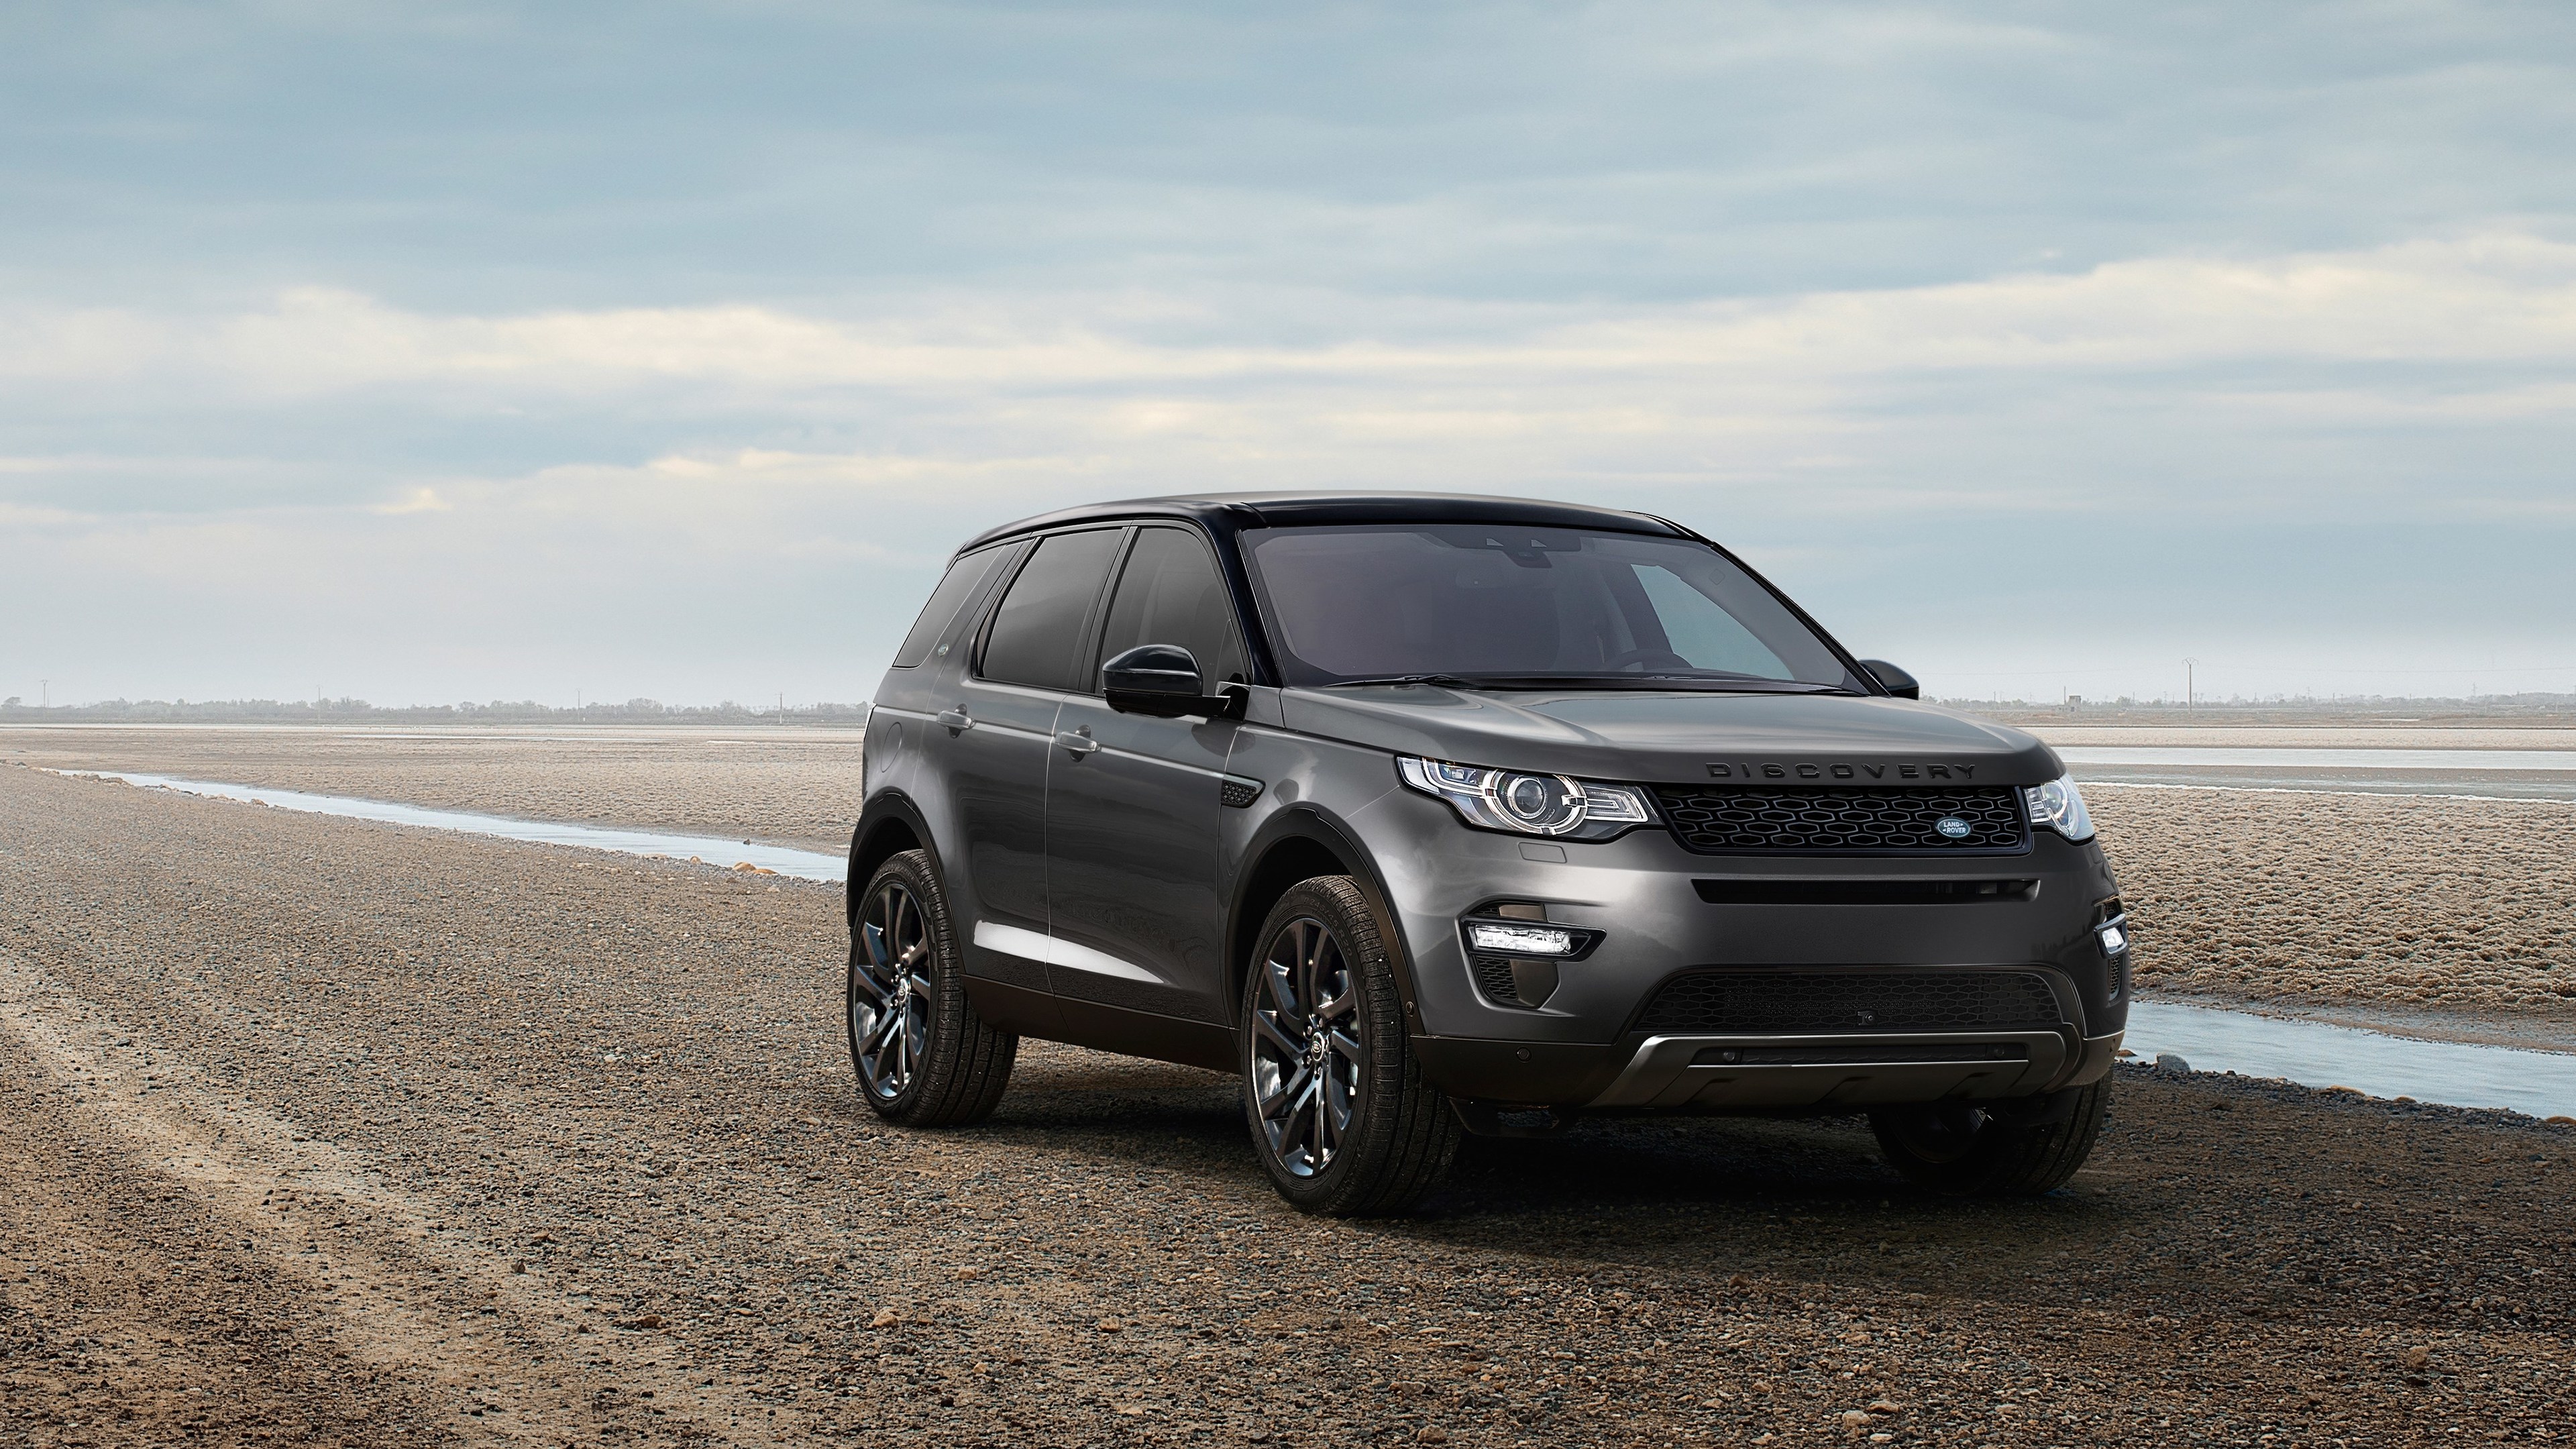 2017 land rover discovery sport 1539104715 - 2017 Land Rover Discovery Sport - range rover wallpapers, land rover wallpapers, cars wallpapers, 2017 cars wallpapers